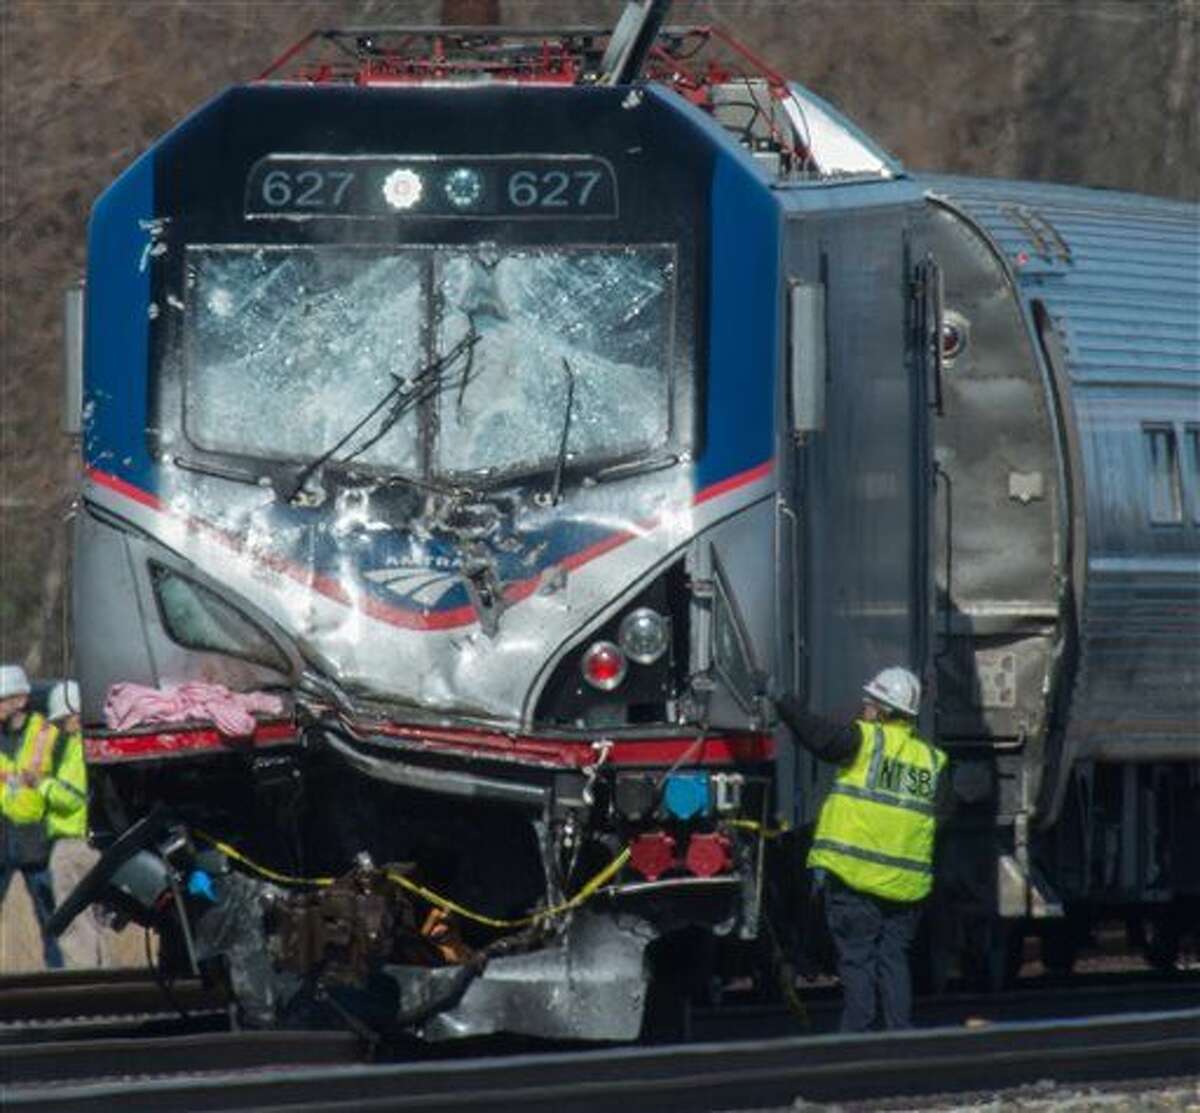 National Transportation Safety Board staffers inspect the engine of Amtrak Train 89 which hit a construction vehicle on the tracks and derailed in Chester, Pa., Sunday, April 3, 2016. The train was heading from New York to Savannah, Ga. (Clem Murray/The Philadelphia Inquirer via AP)